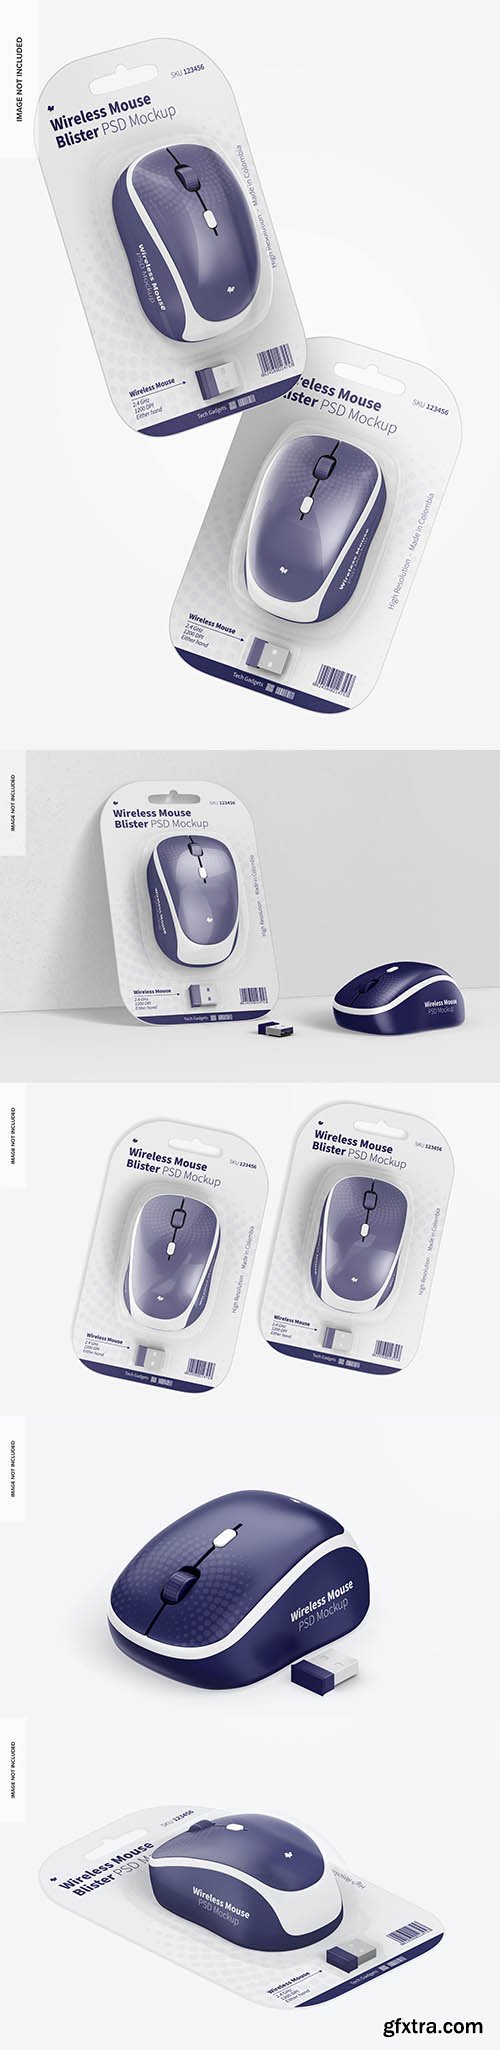 Wireless mouse blisters mockup